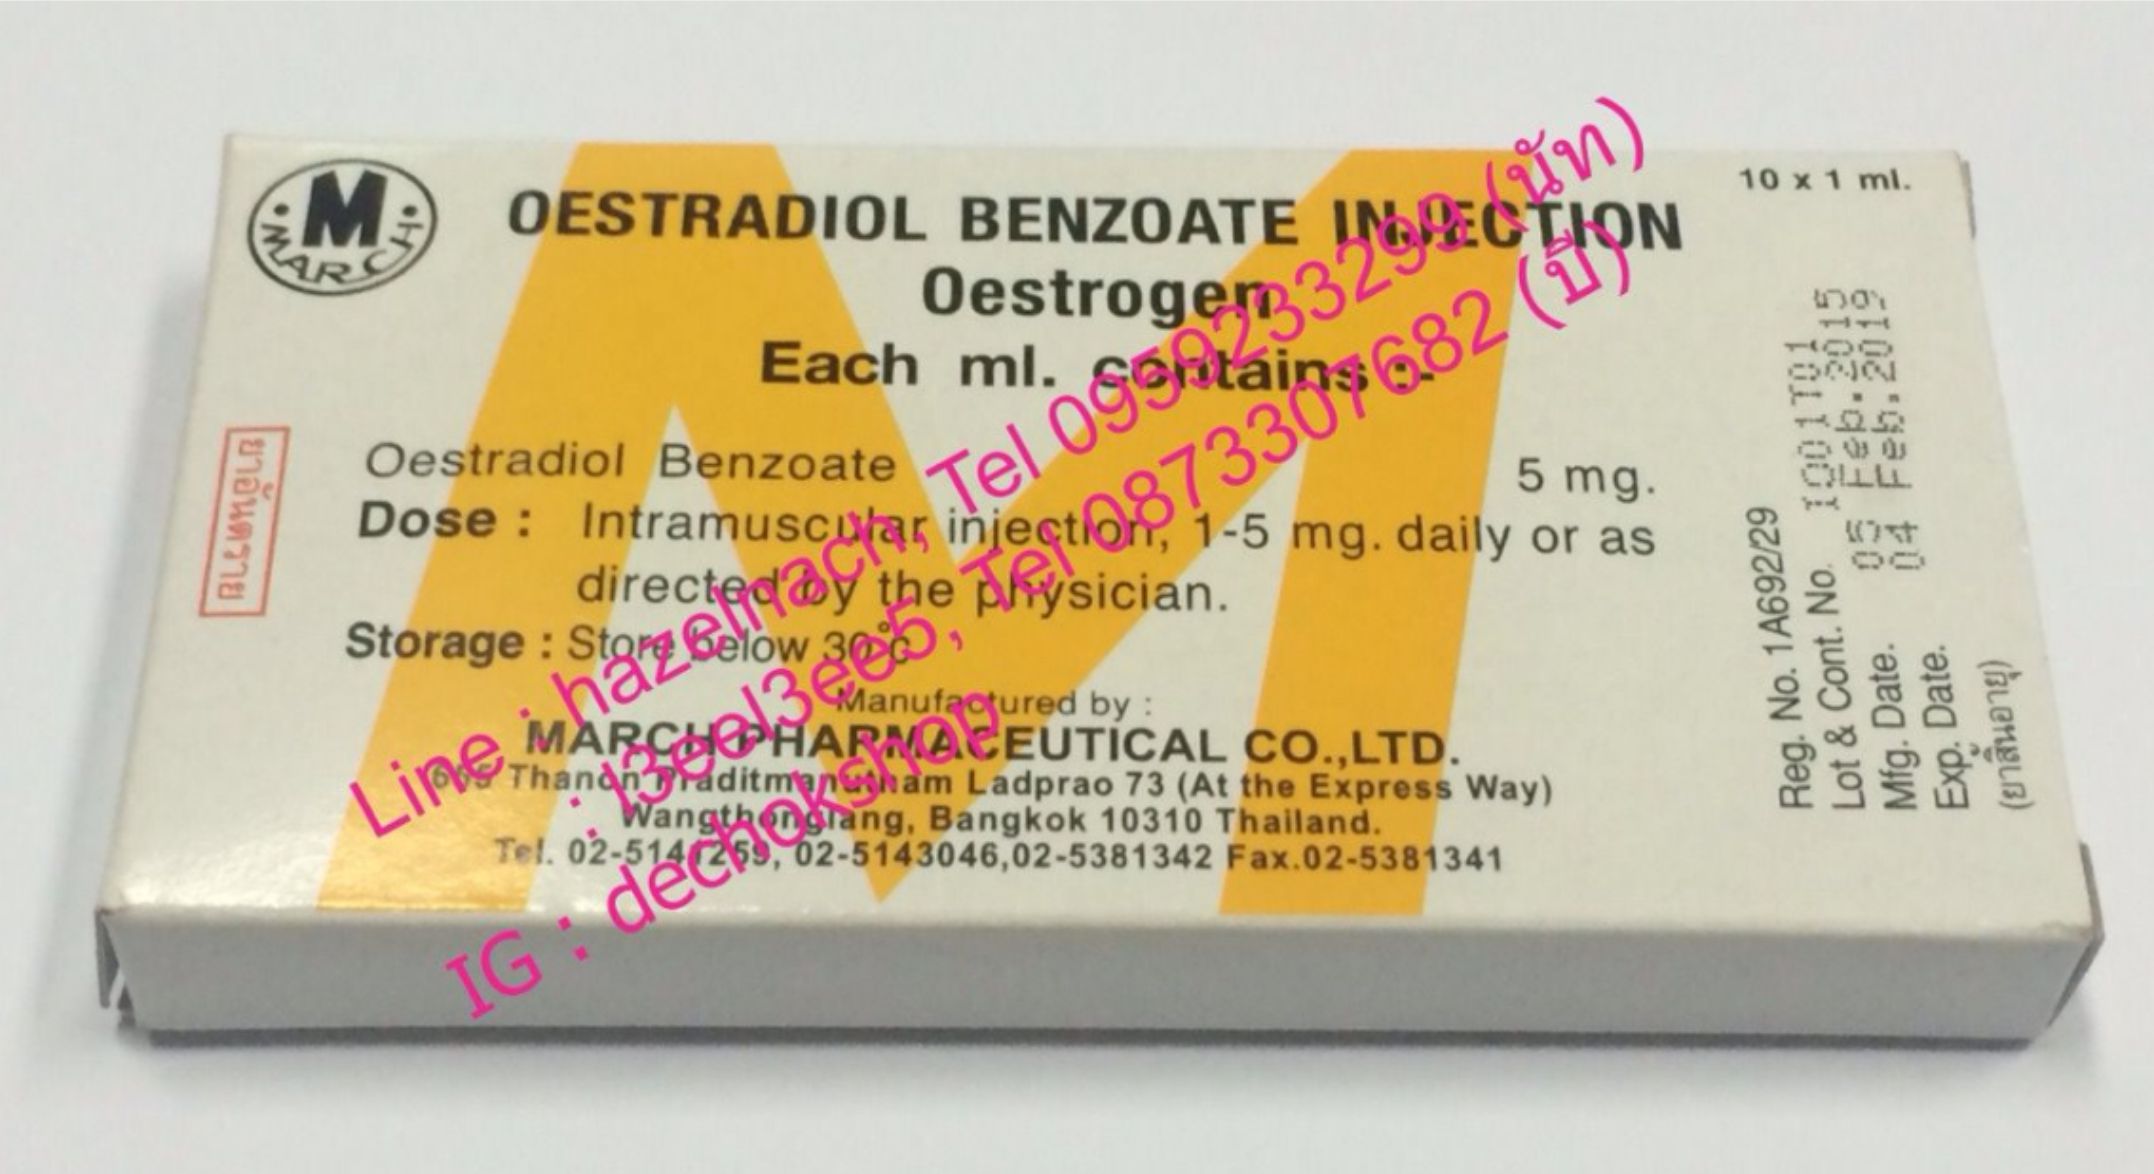 Oestradiol Benzoate Injection